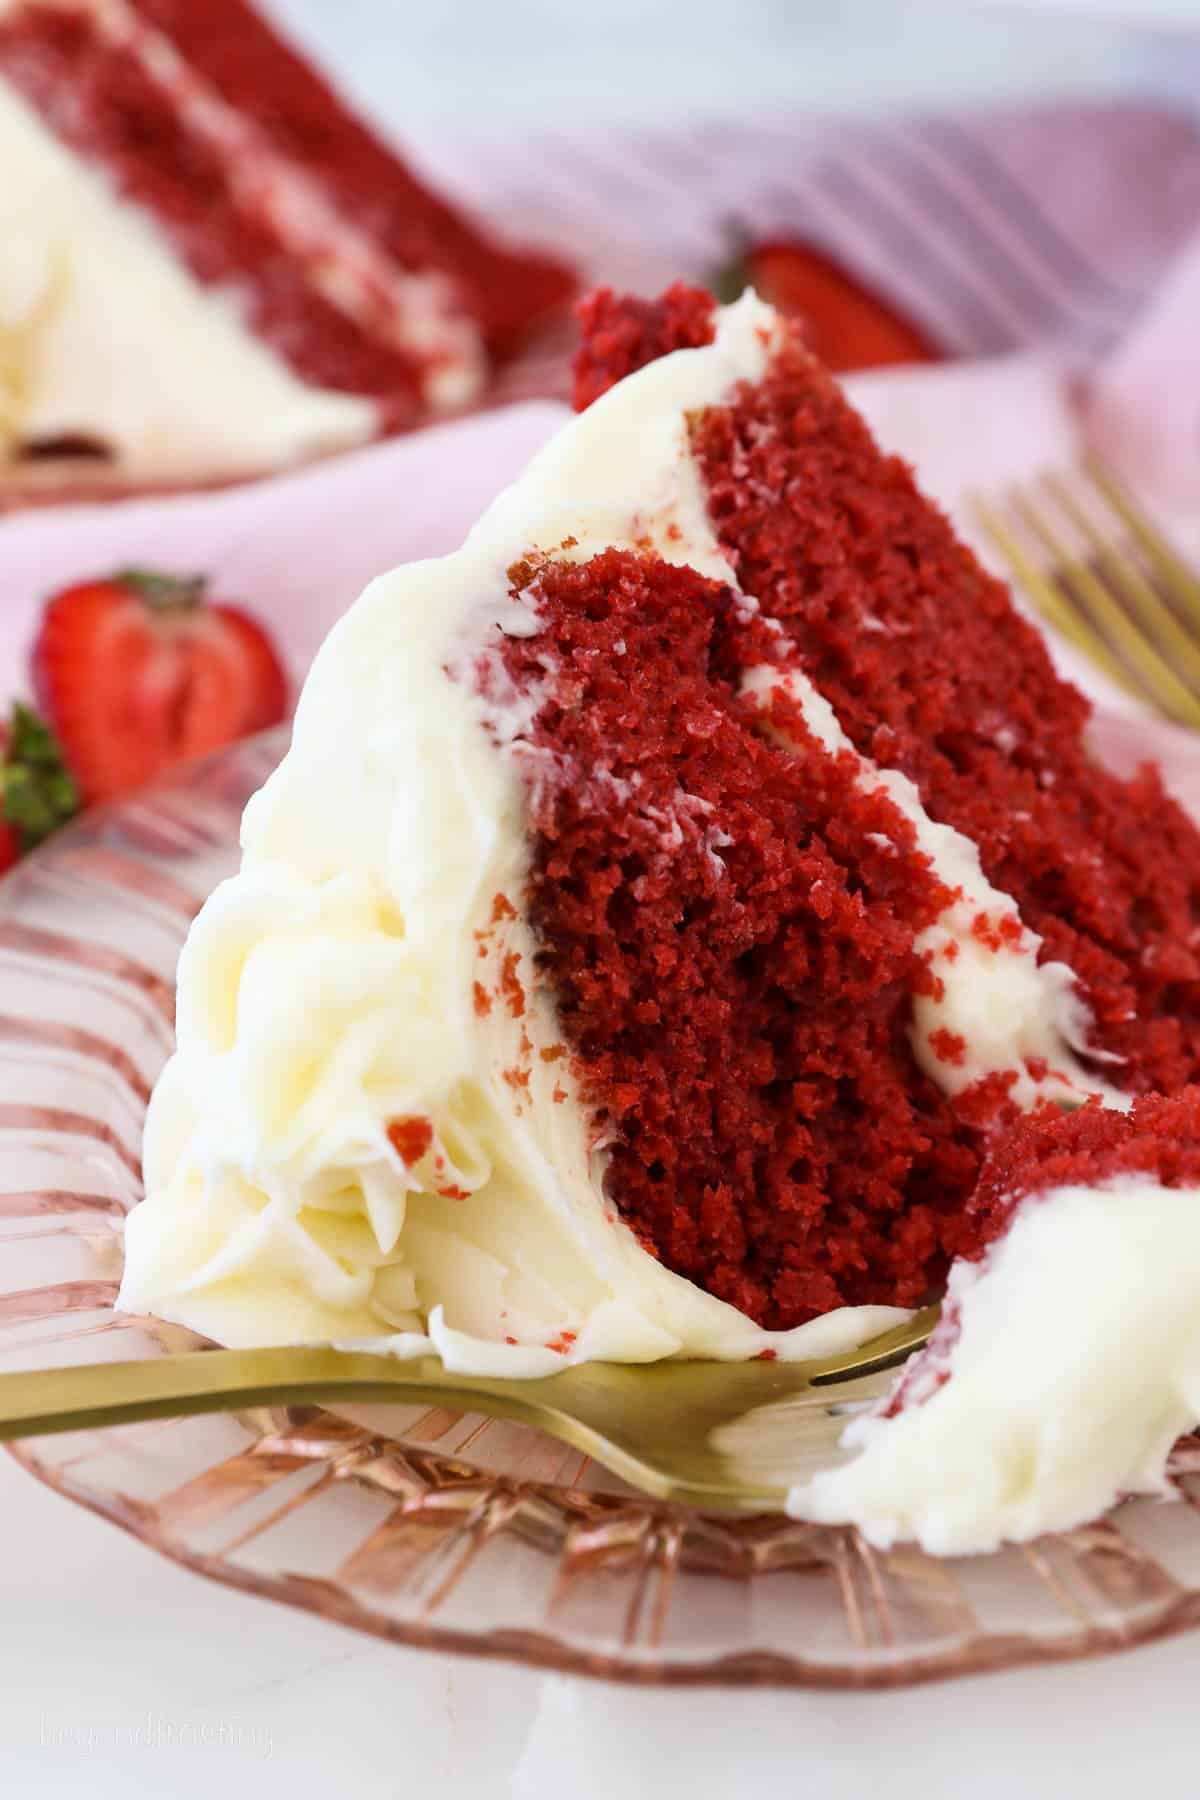 Close-up of a slice of red velvet cake on a plate